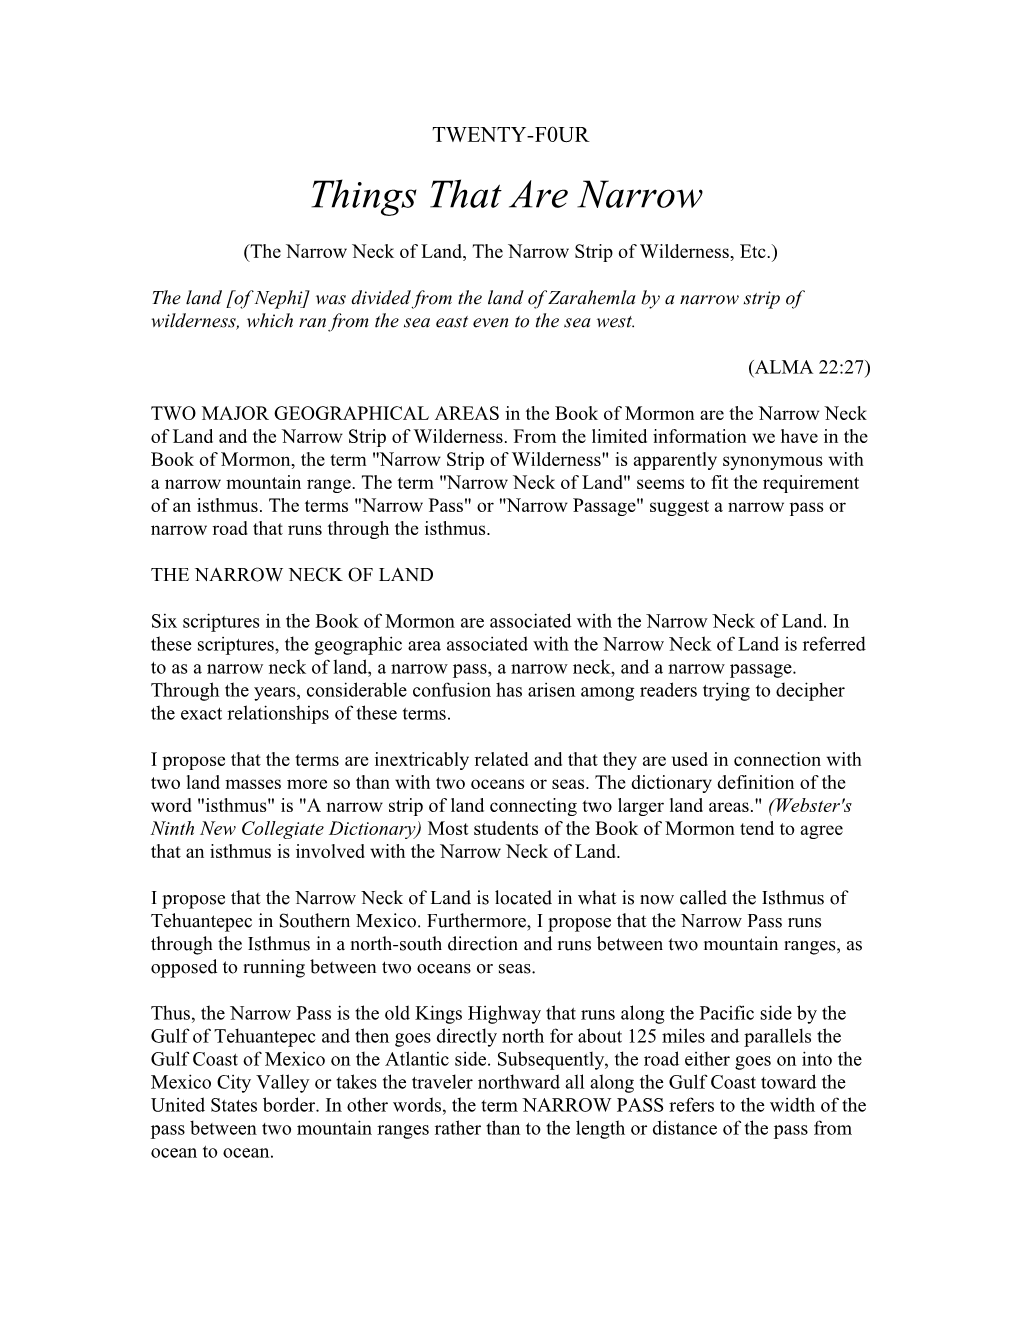 Things That Are Narrow